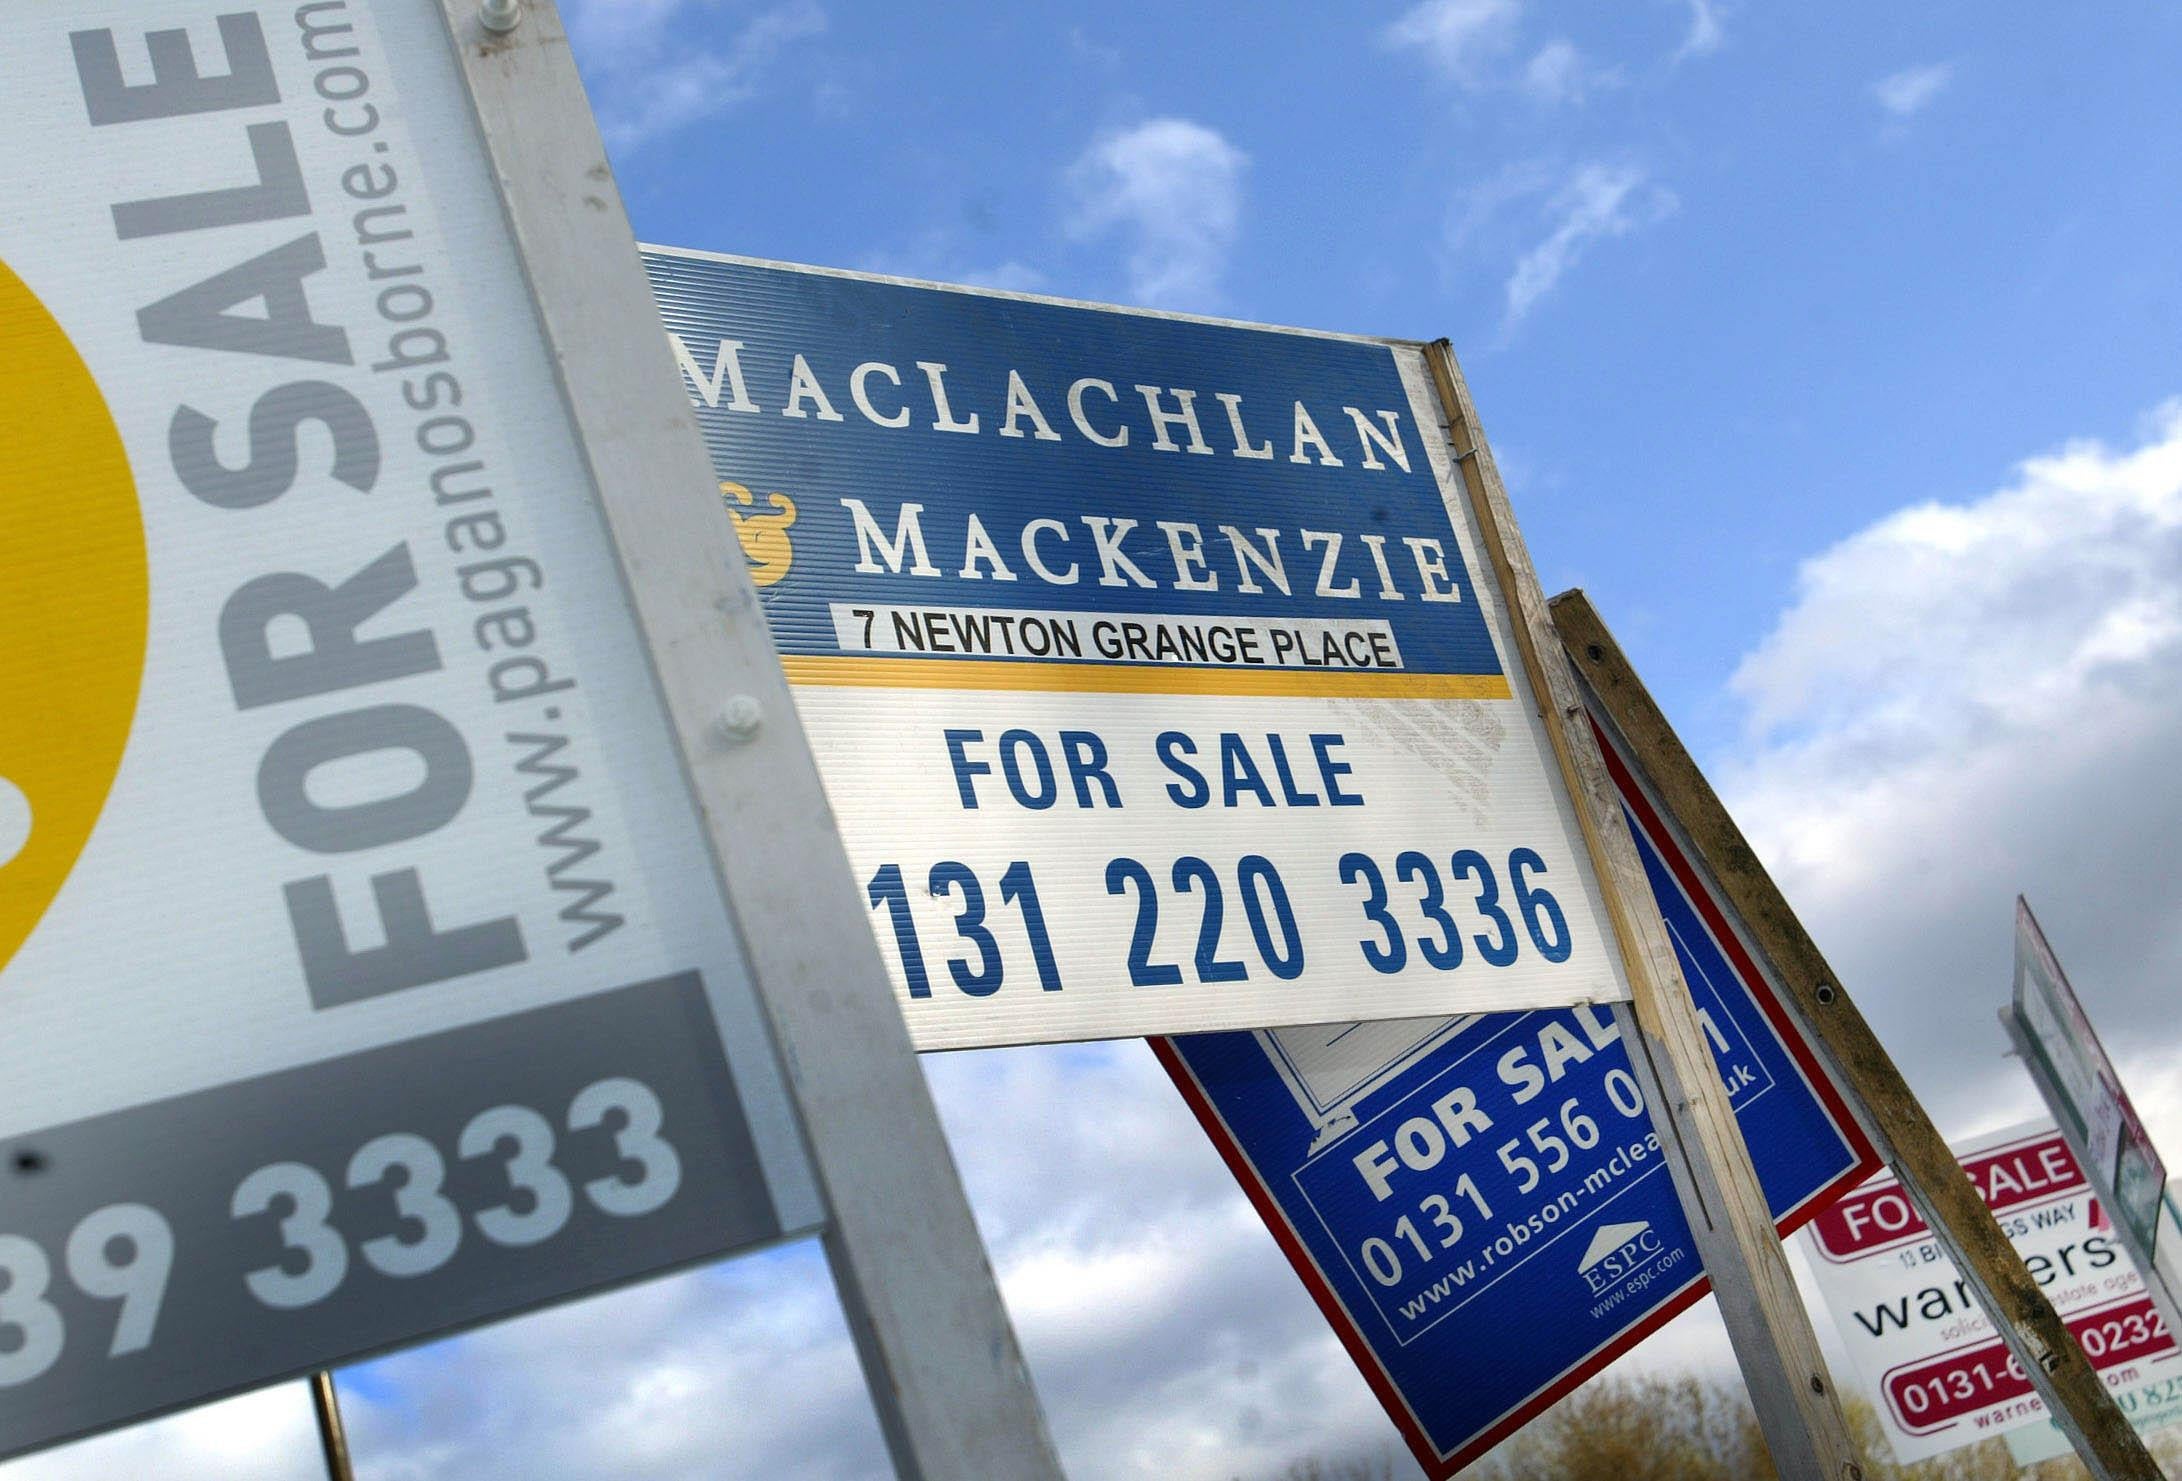 The housing market defied any expectations of a slowdown in June, with average property prices up 1.8% month-on-month, according to Halifax (David Cheskin/PA)